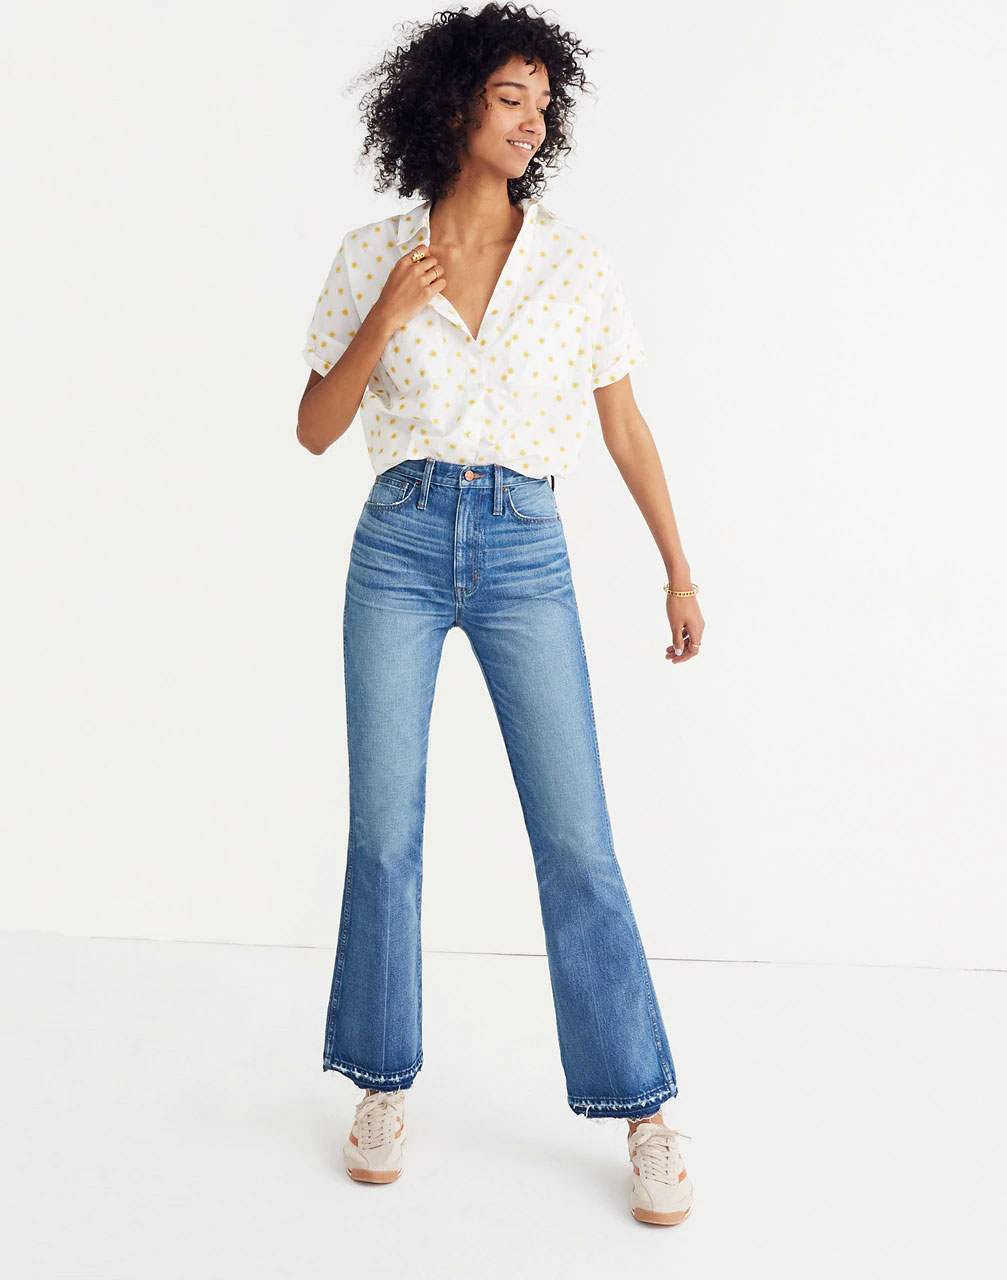 You Can Thank Our Editors For Finding These *Amazing* Jeans At Madewell ...